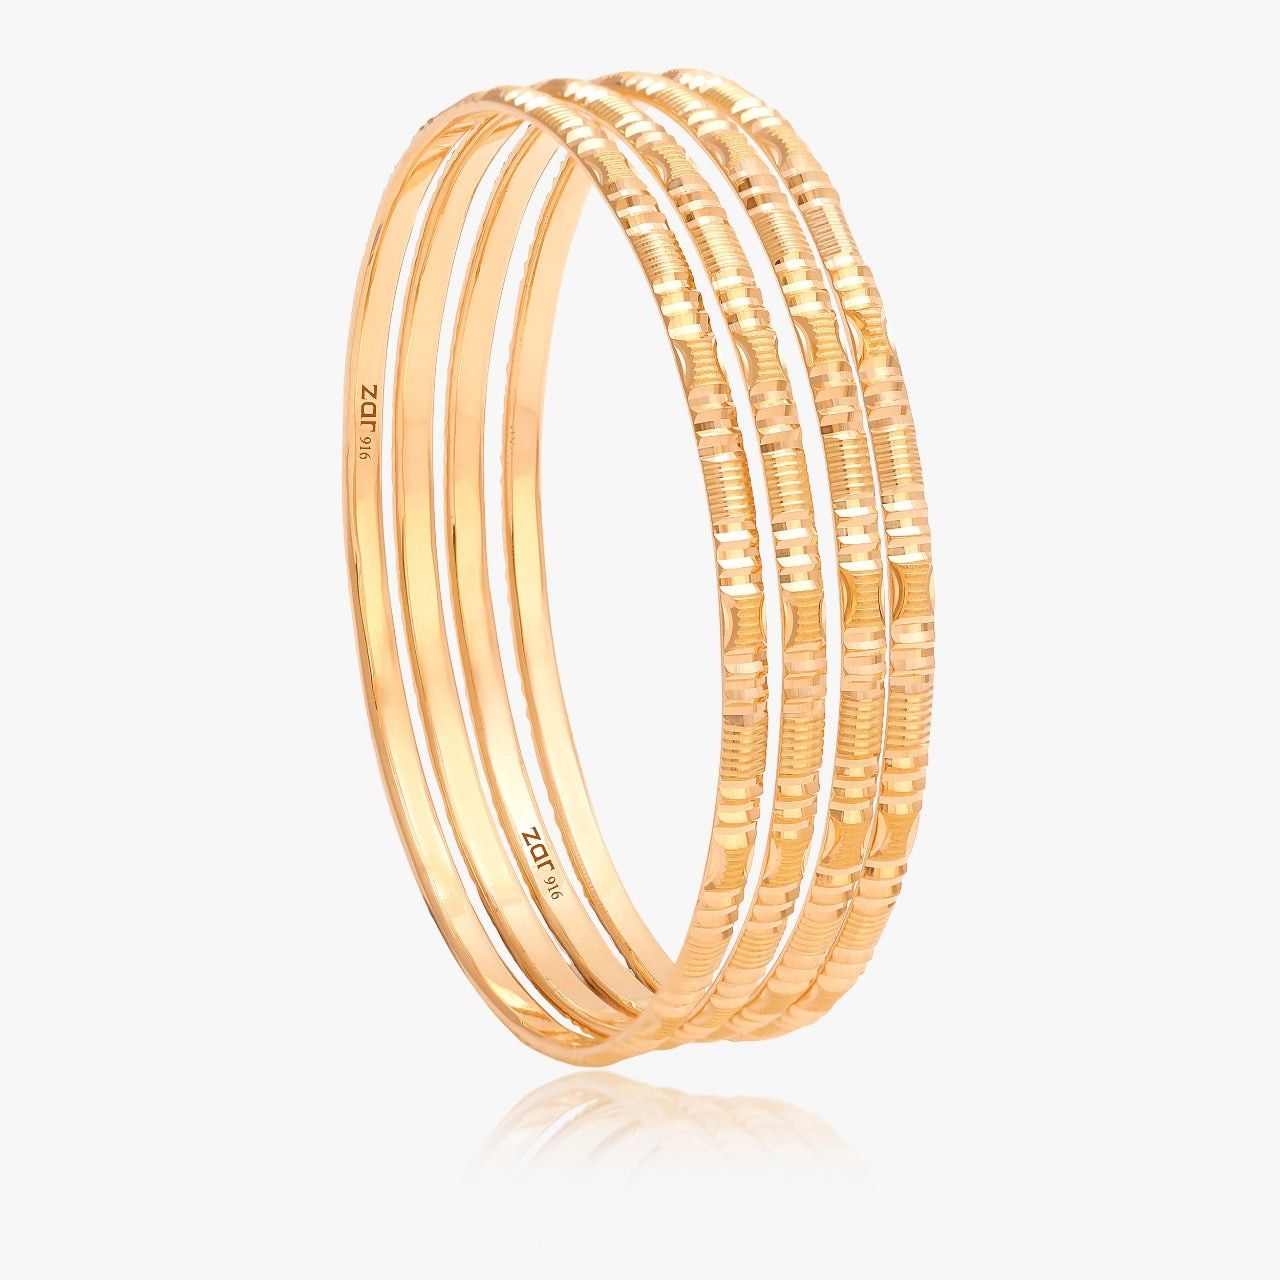 22 Carat Gold Bangles: Timeless Elegance in Every Glittering Coil